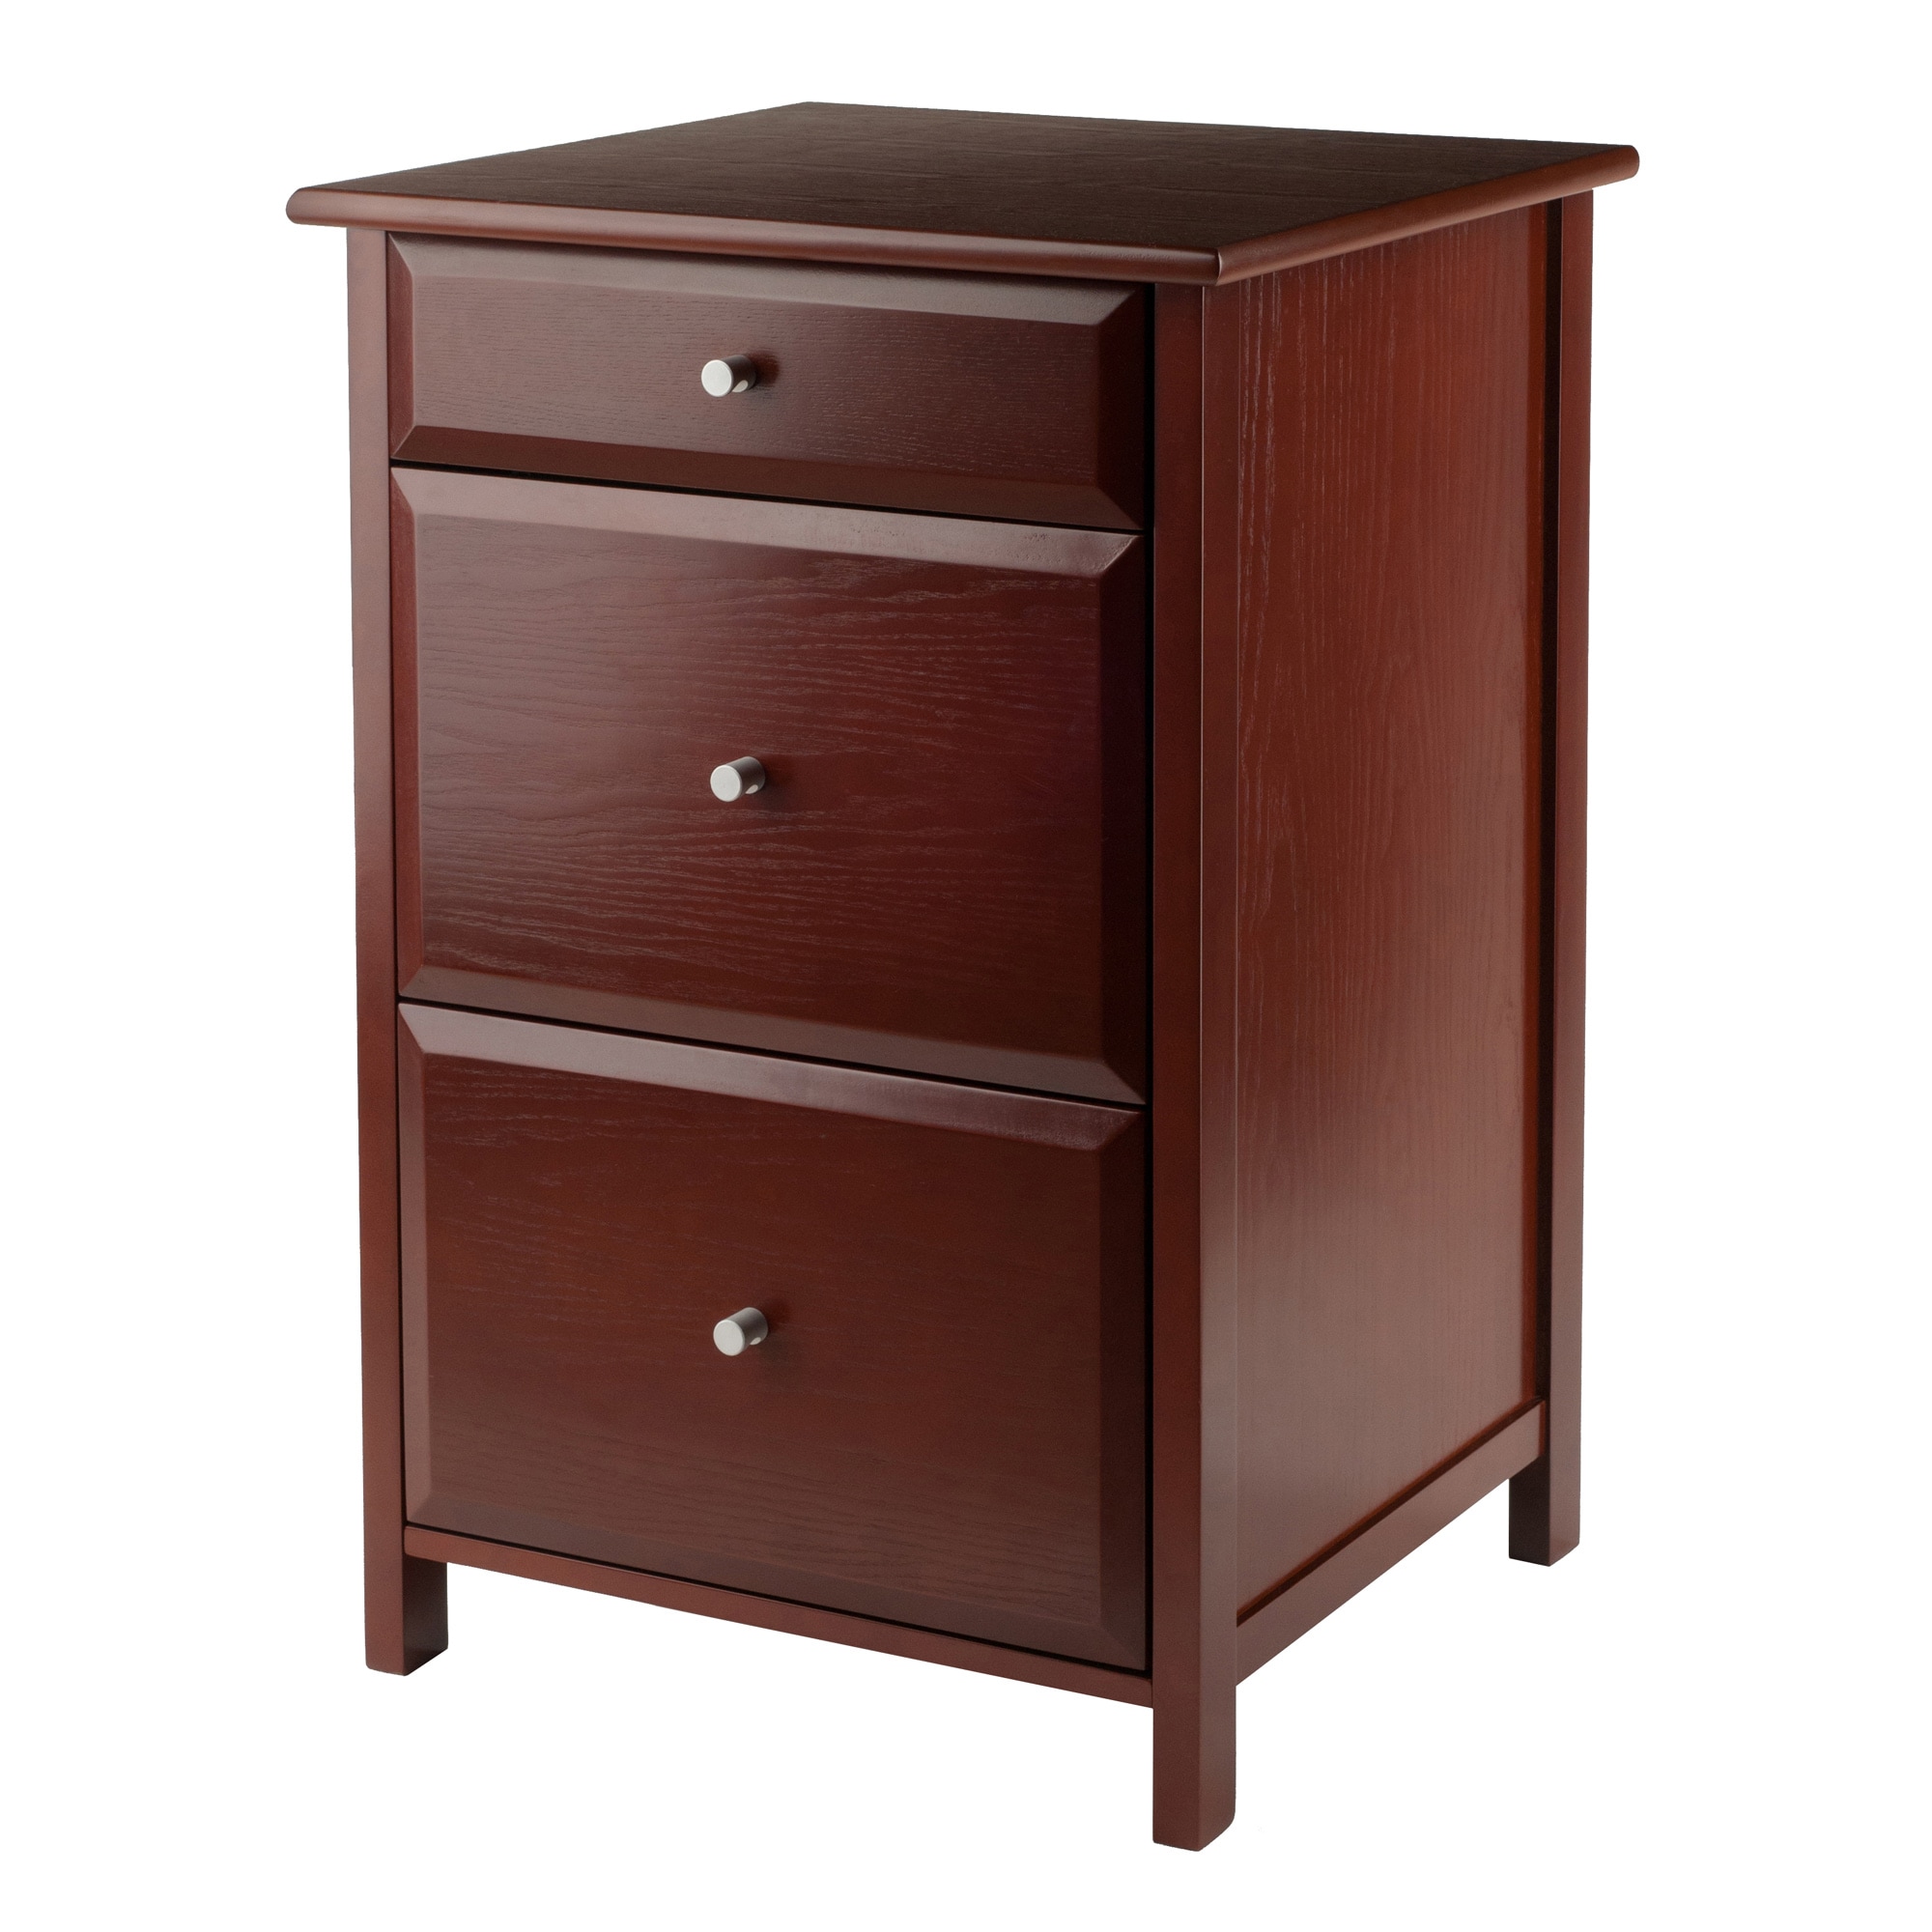 3-Drawer Narrow Square File Cabinet